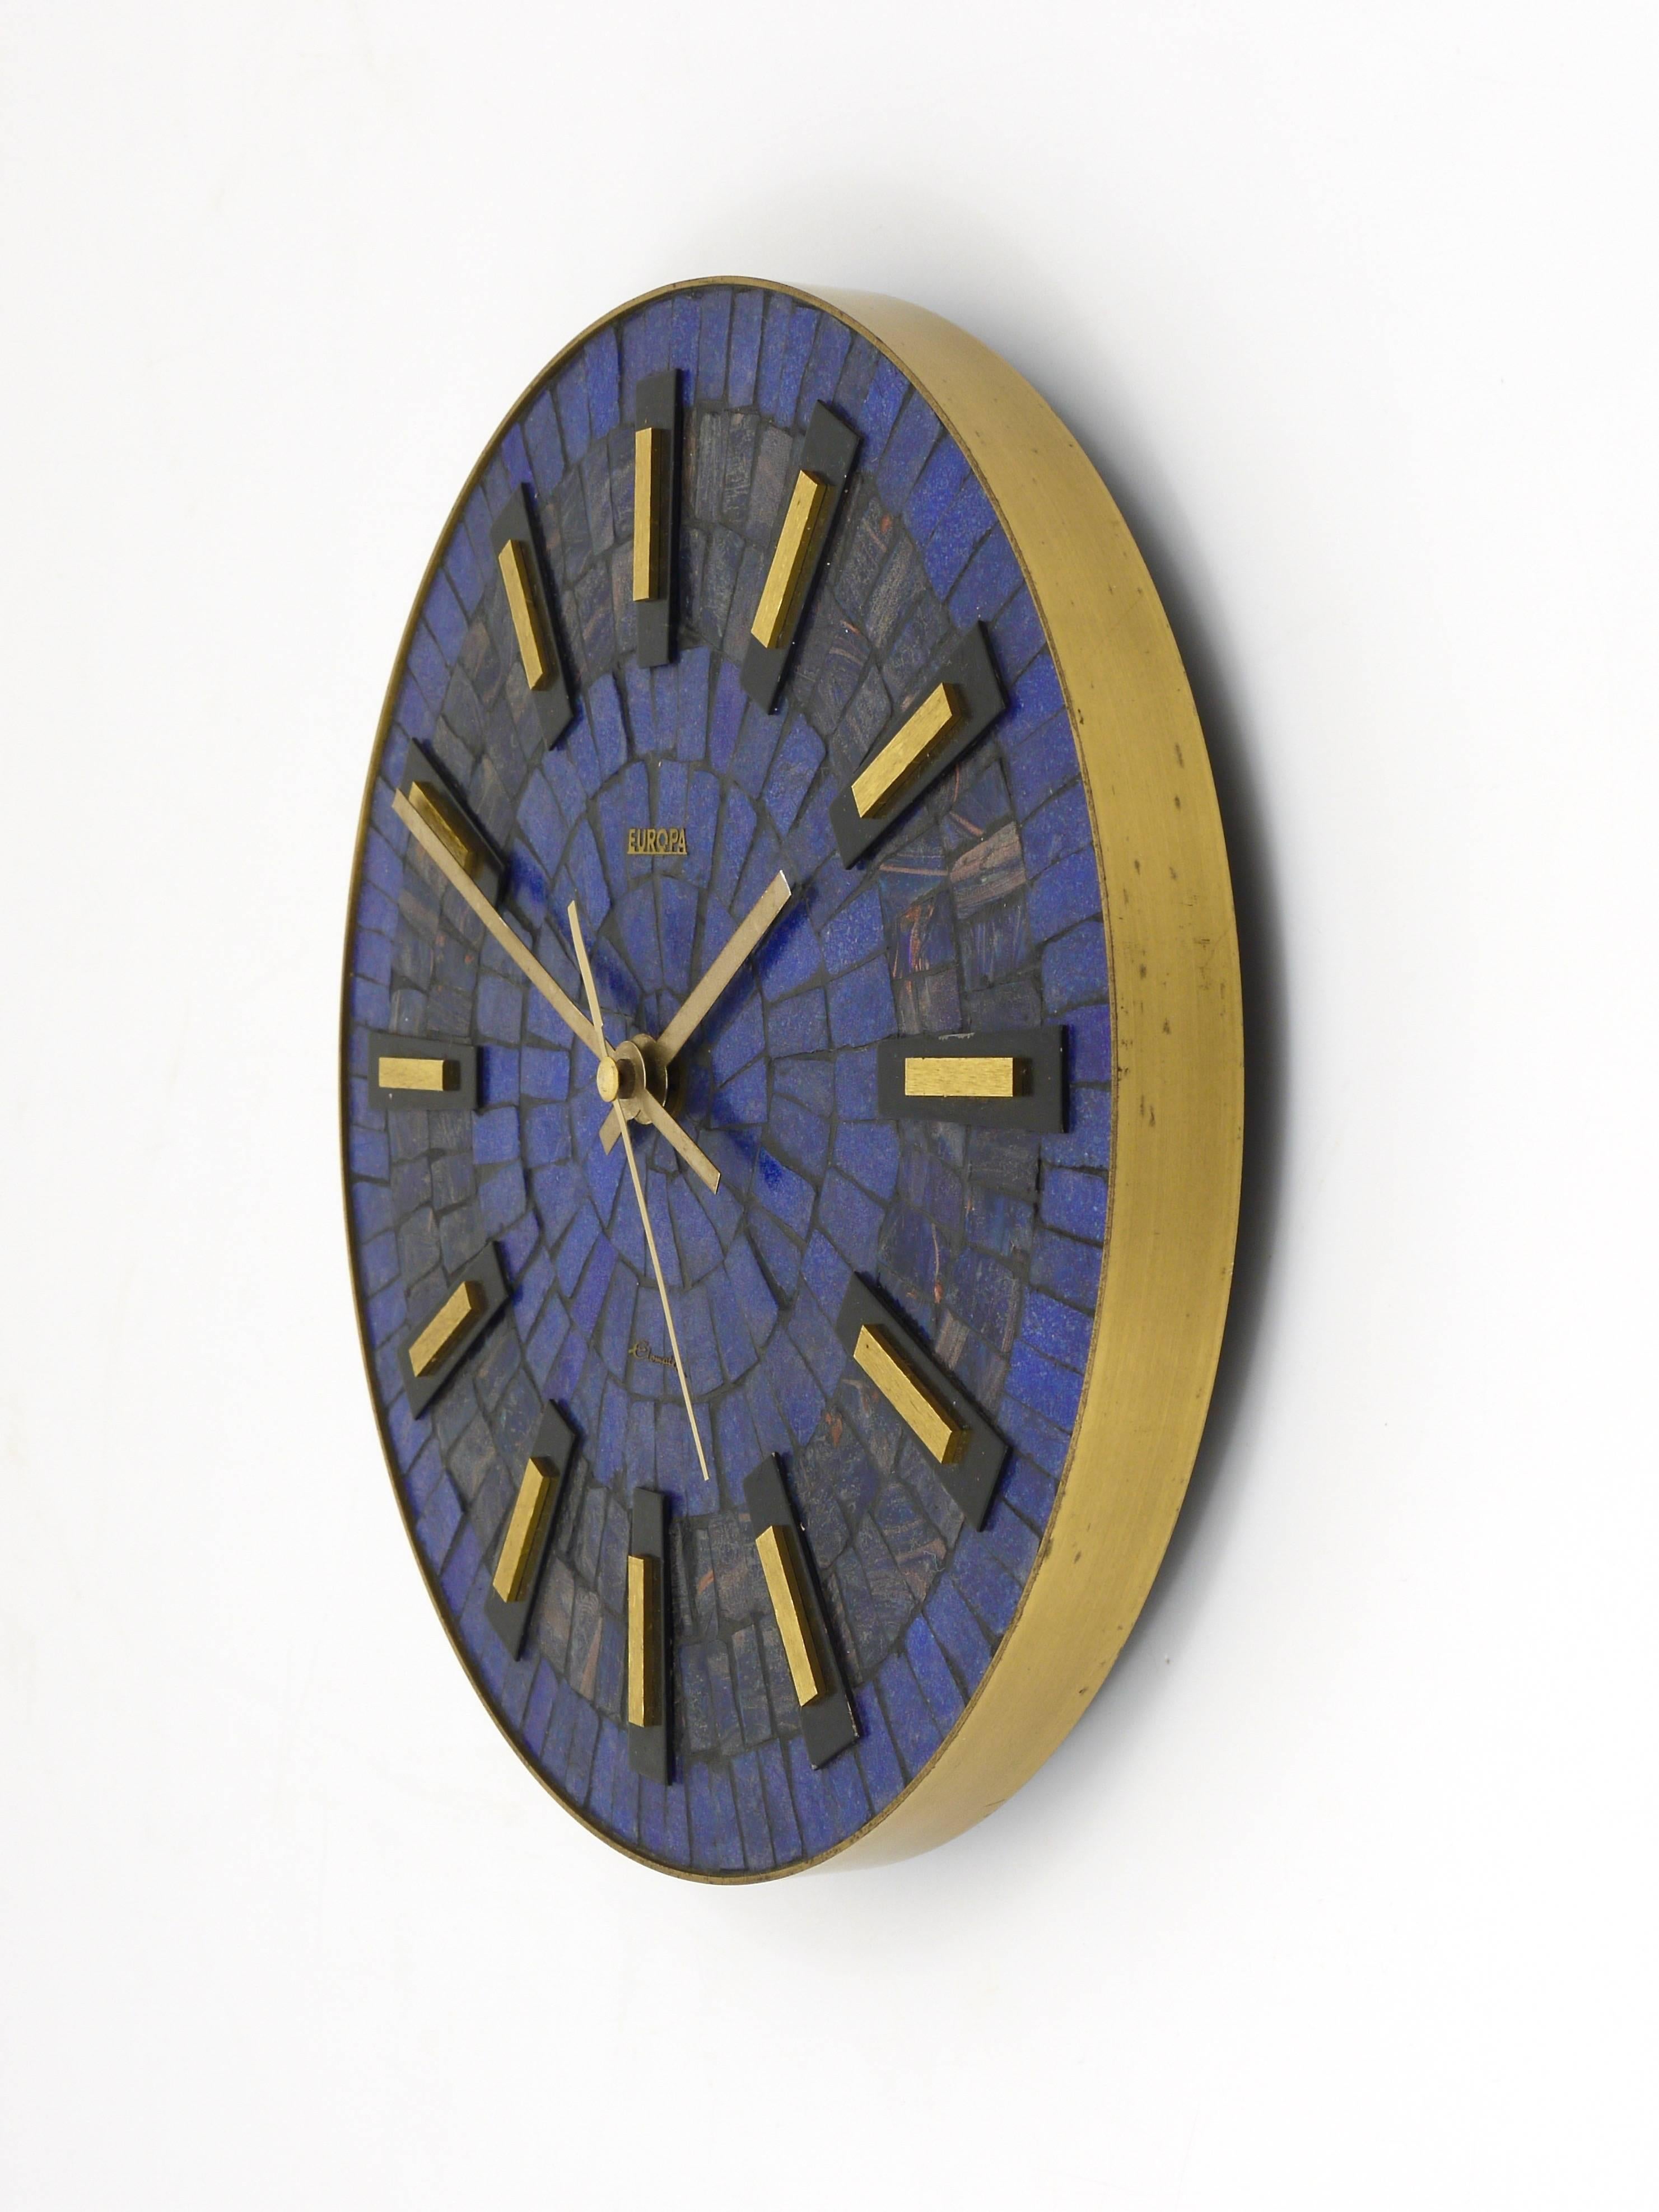 A beautiful round Mid-Century wall clock, with nice brass hands and indices and a stylish blue mosaic clocks´ face. Executed in the 1950s by Europa, Germany. Original battery-operated movement. In very good condition.